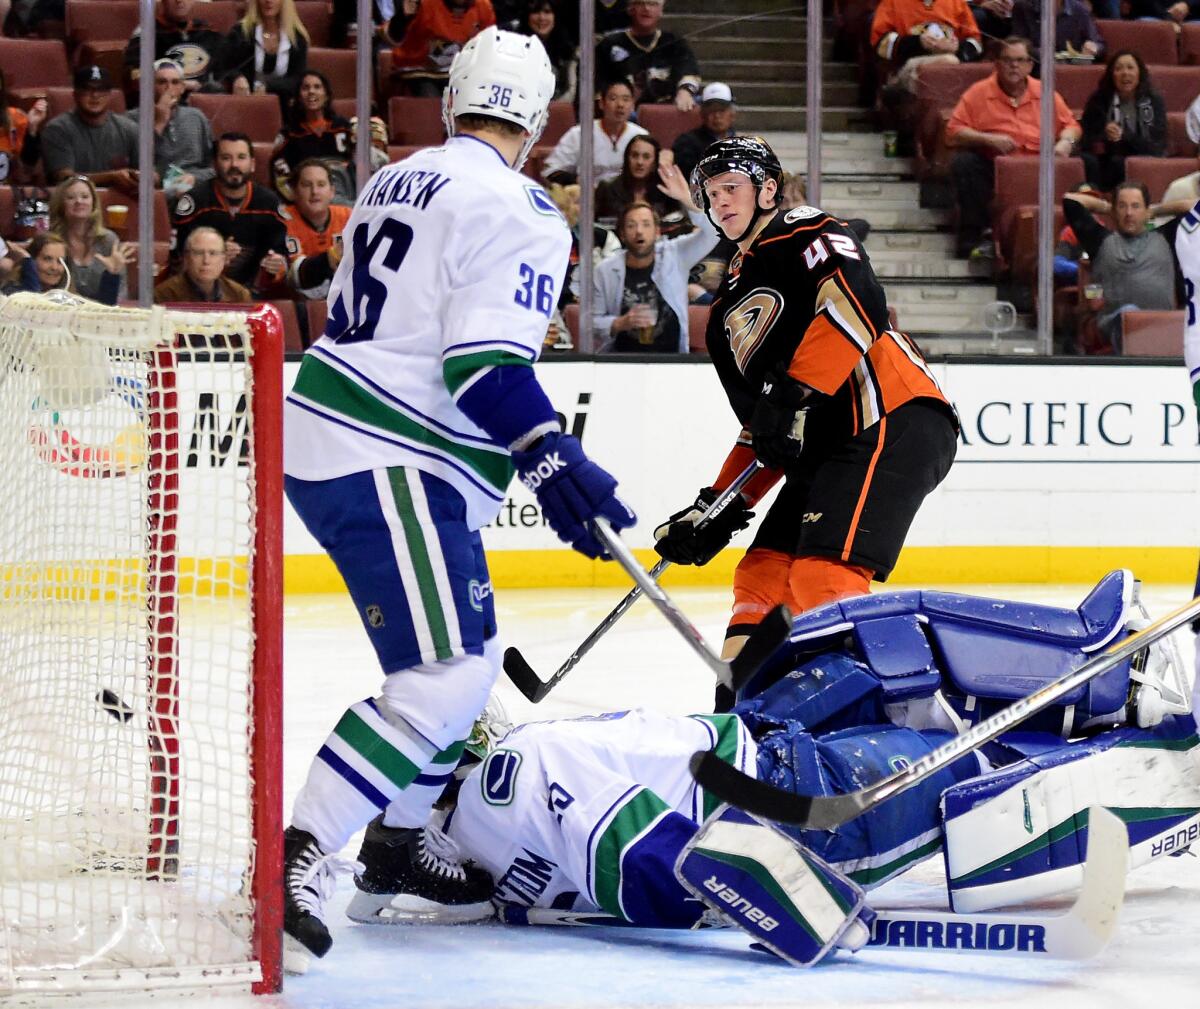 Ducks defenseman Josh Manson scores a goal on Vancouver goalie Jacob Markstrom during the first period of a game April 1 at Honda Center.